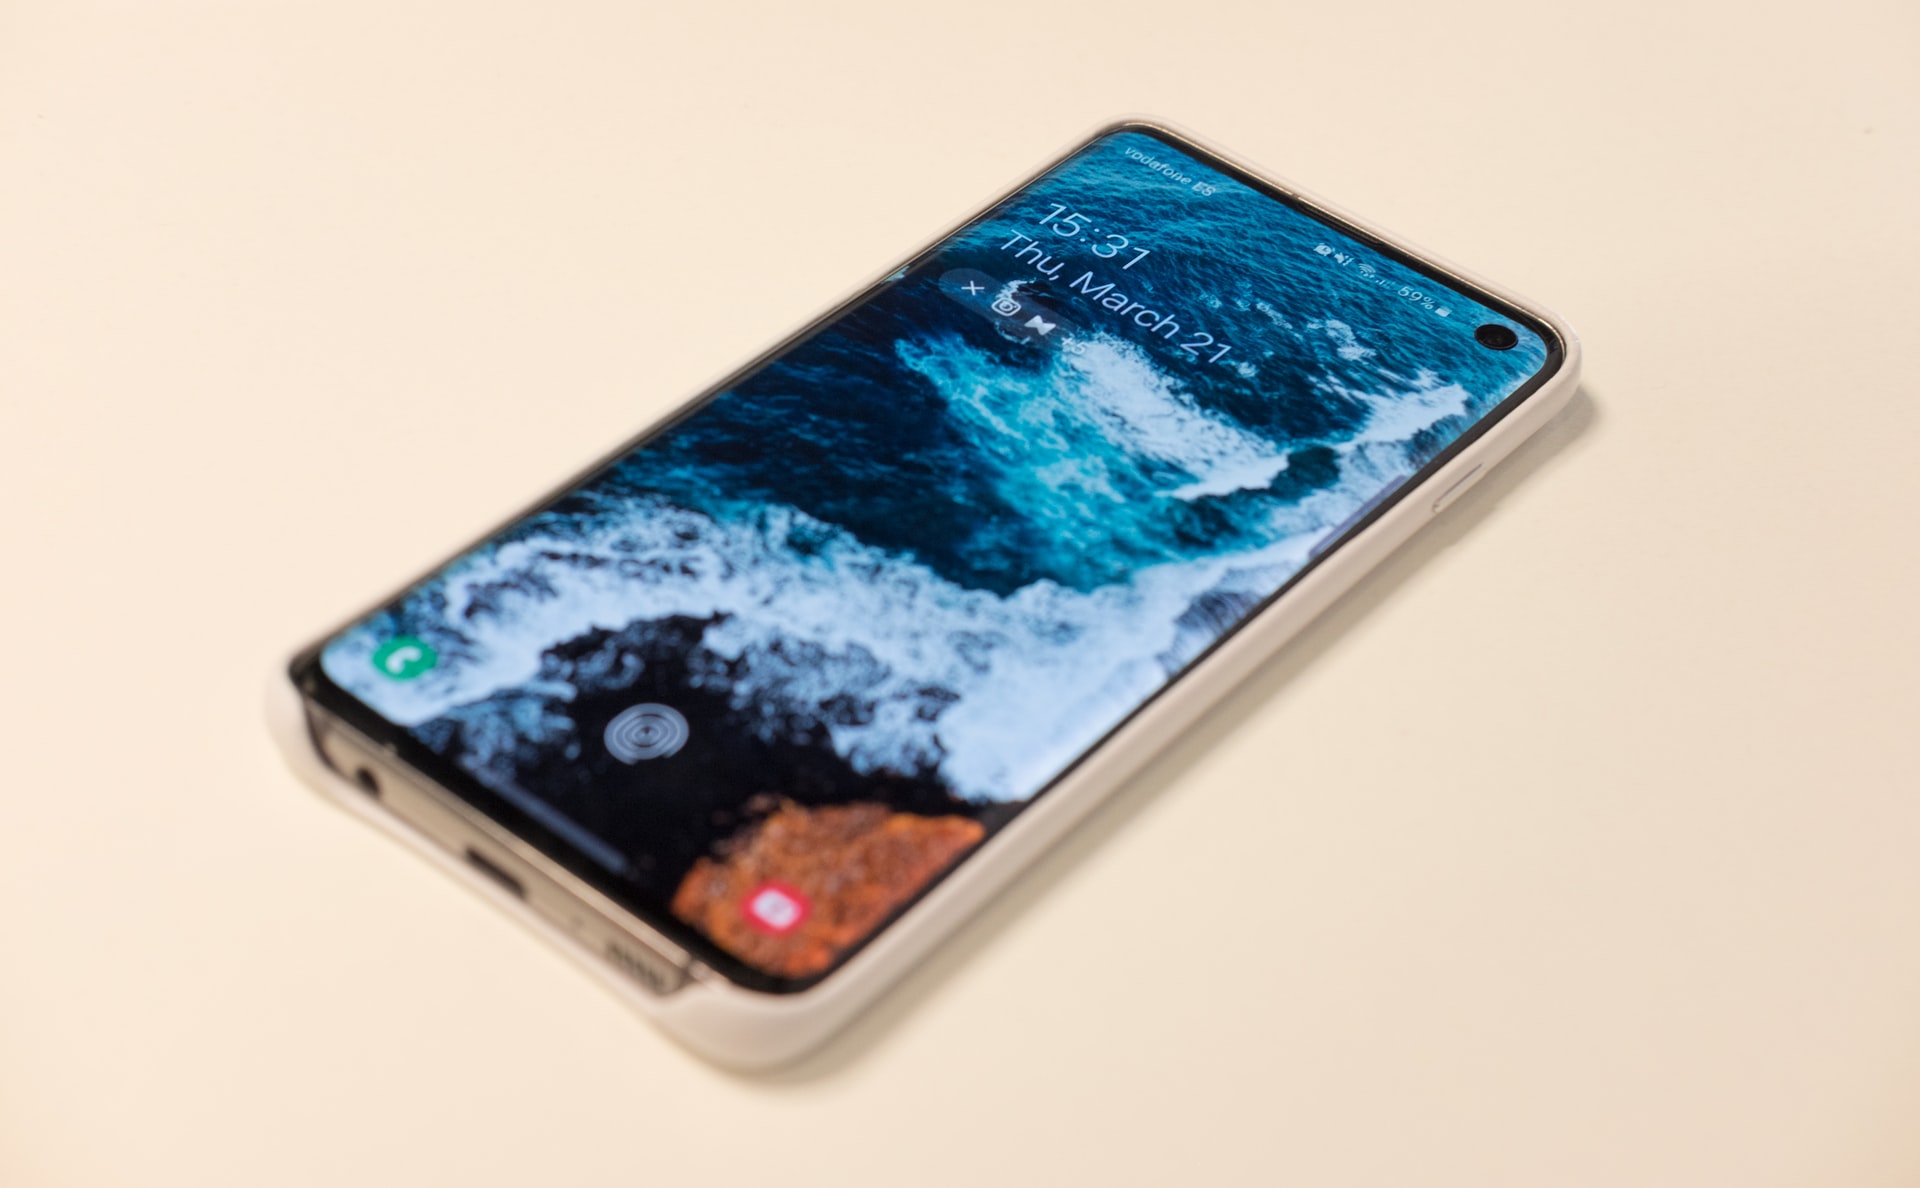 Comparison Between Samsung Galaxy S10 and S9 - Which Offers Better Performance?